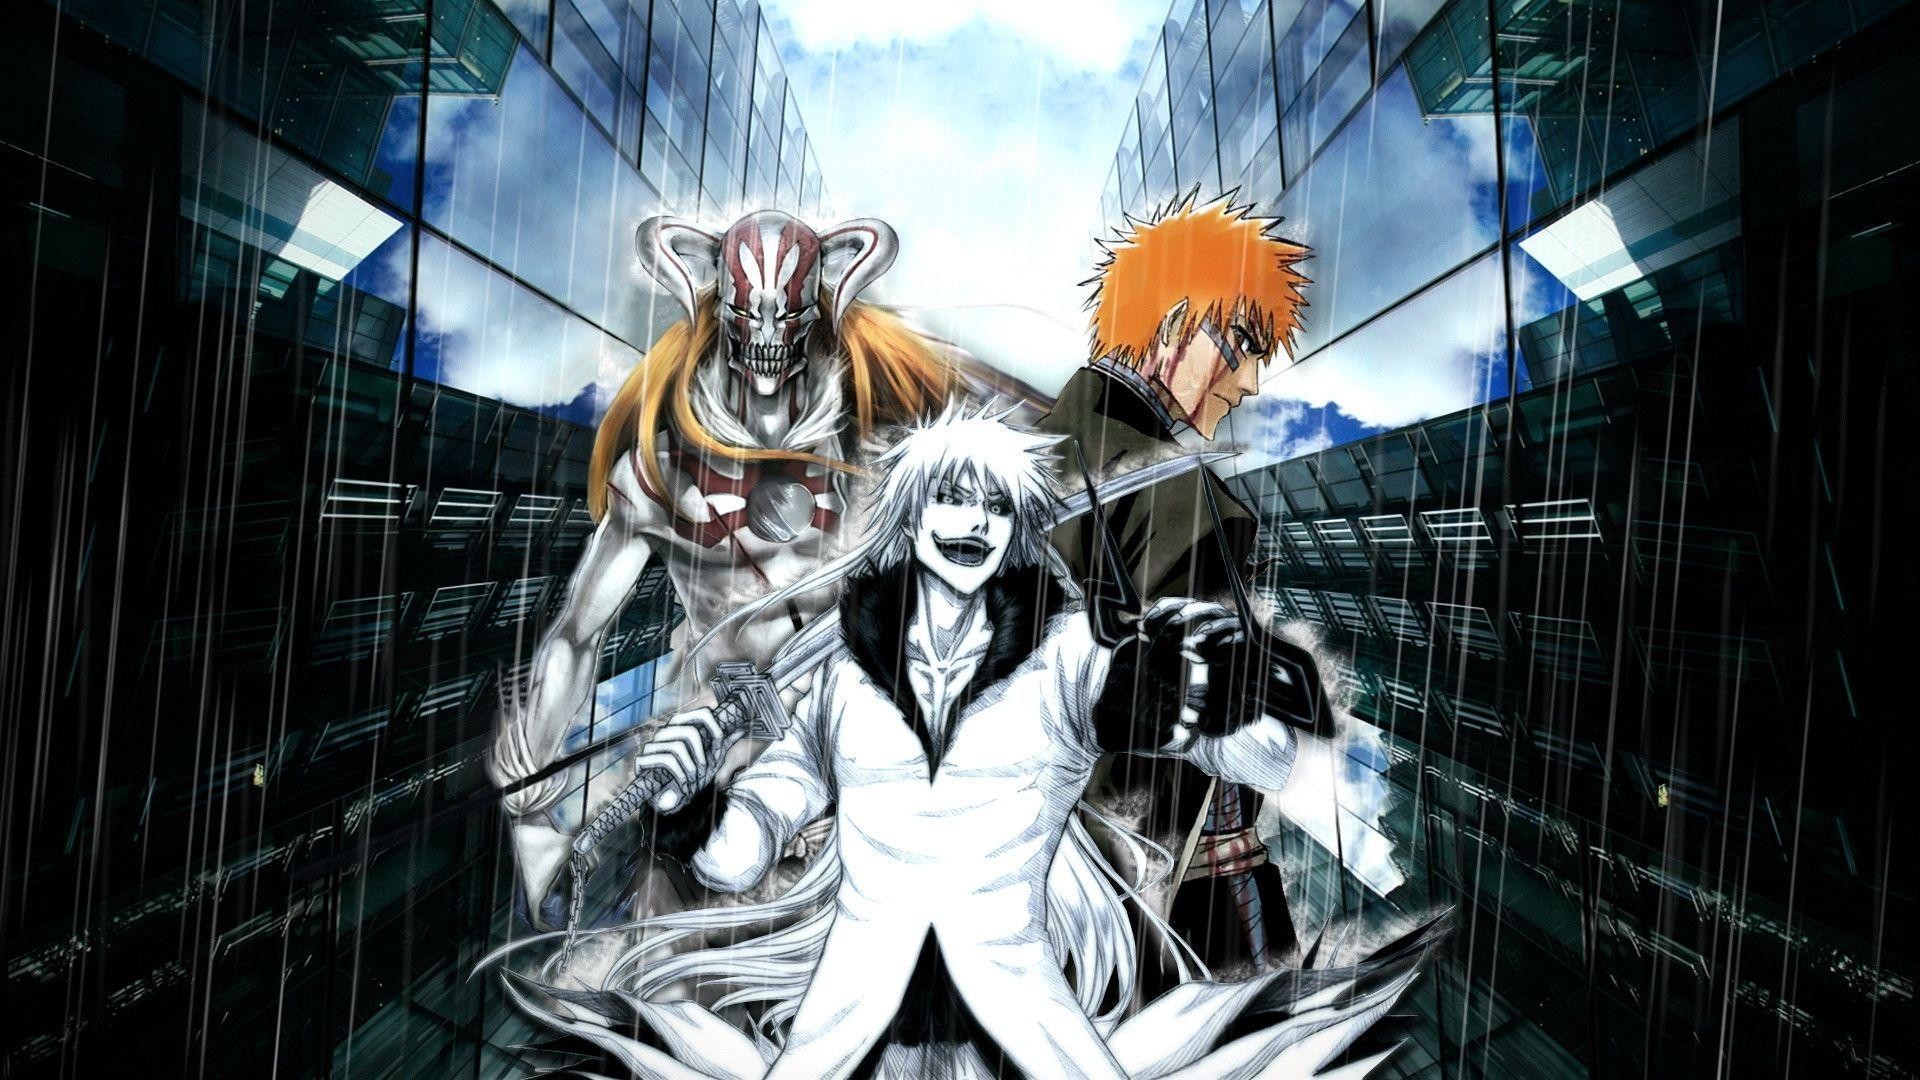 1920x1080 Bleach HD Wallpaper | Bleach Characters Pictures | Cool Wallpapers